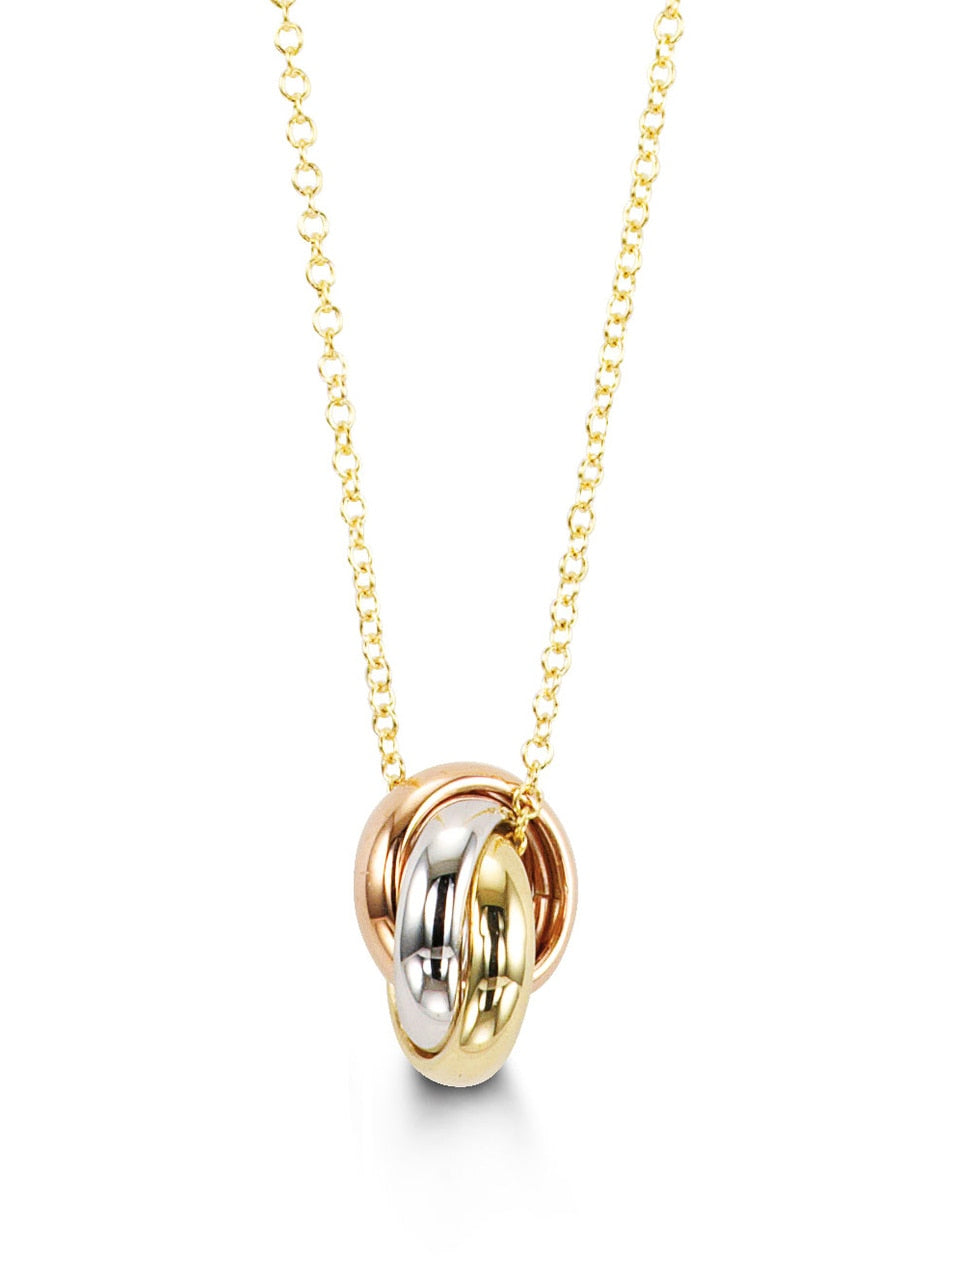 10K Yellow, White and Rose Gold Forever Love Ring Pendant with Chain